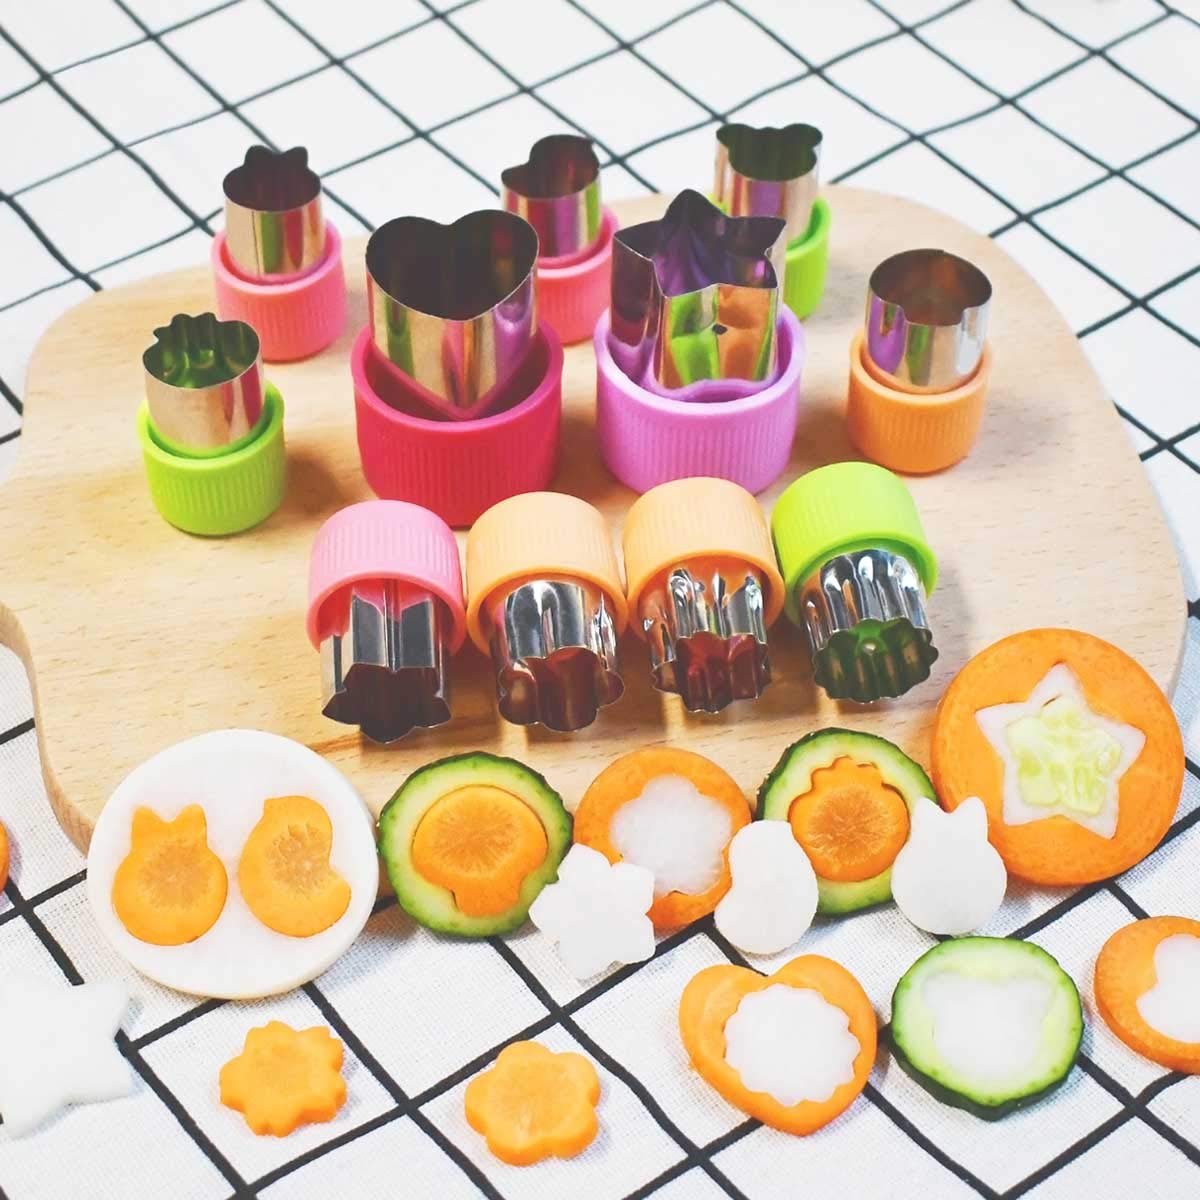 11Pcs Vegetable Cutter Shapes Set Mini Cookie & Fruit & Pie Stamps Mold Stainless Steel Mini Cookie Cutters Mini Food Cutters for Kids Baking and Food Supplement Tools Accessories Christmas Gift